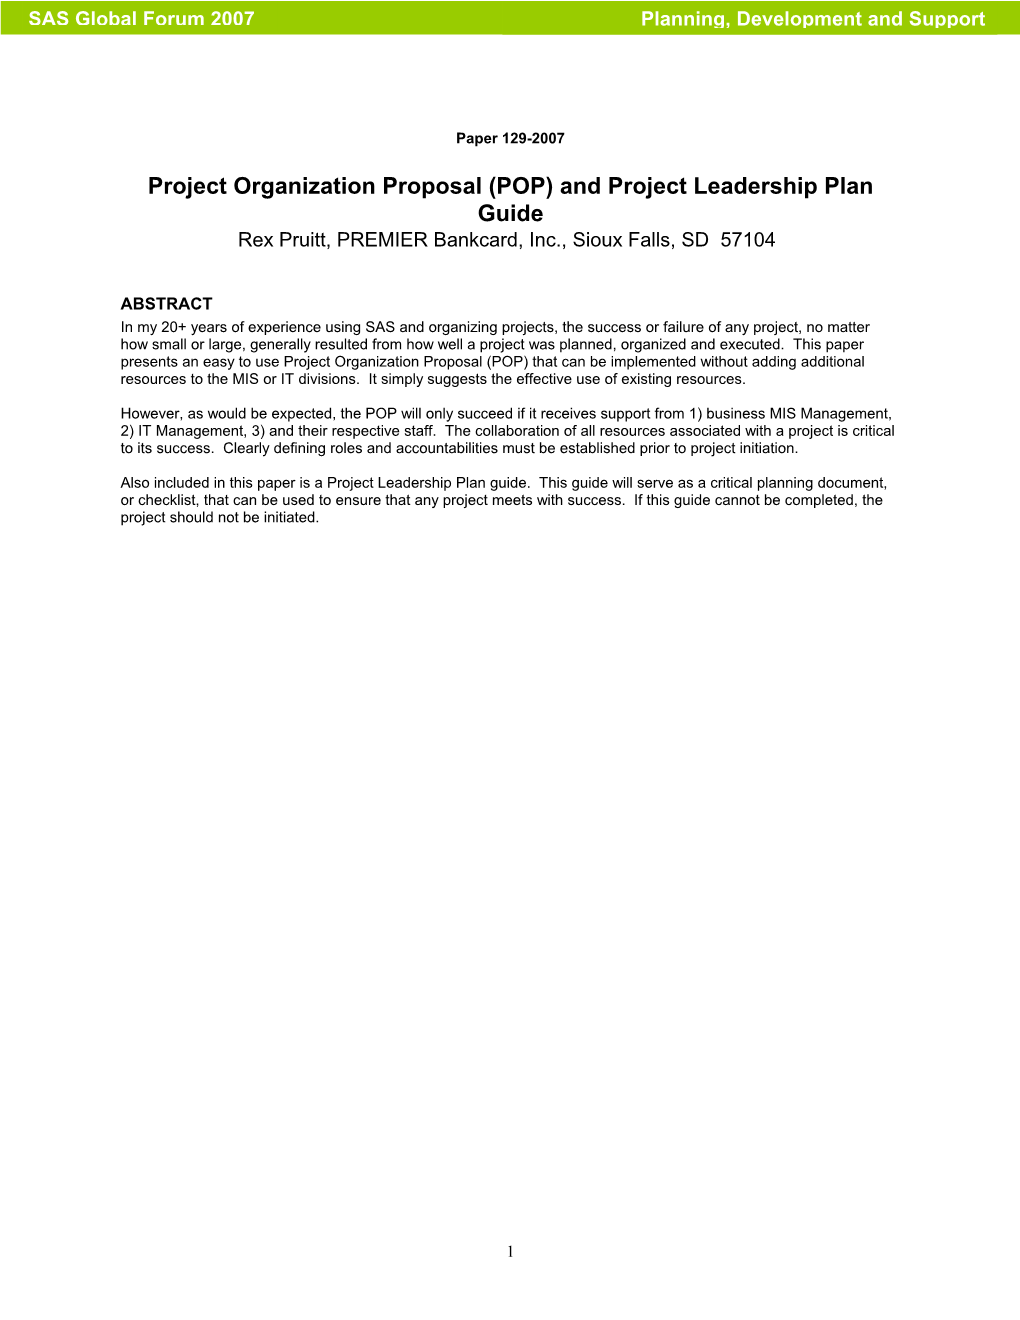 129-2007: Project Organization Proposal (POP) and Project Leadership Plan Guide